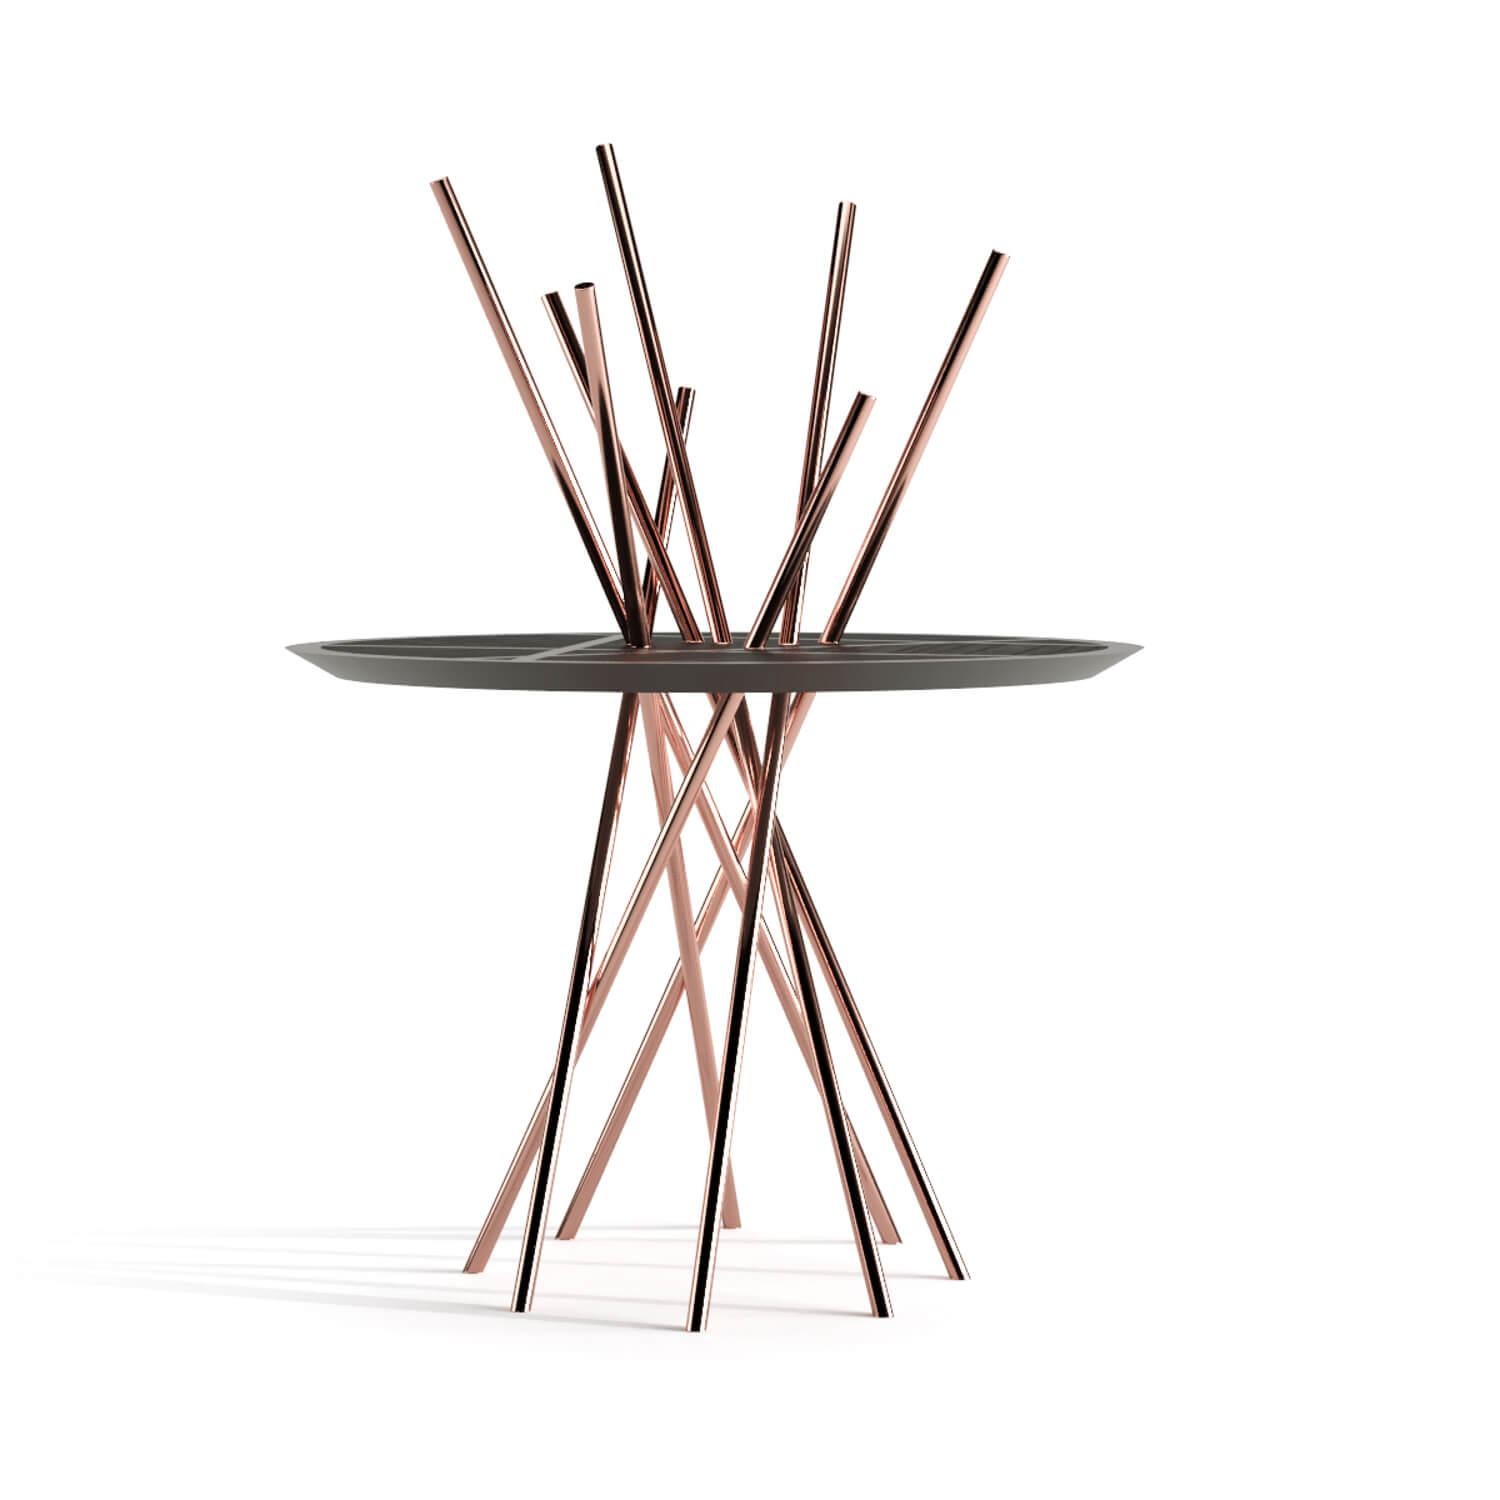 The Modernity Round Pedestal Table Walnut Wood White Lacquer Brushed Stainless Steel (en anglais) en vente 8